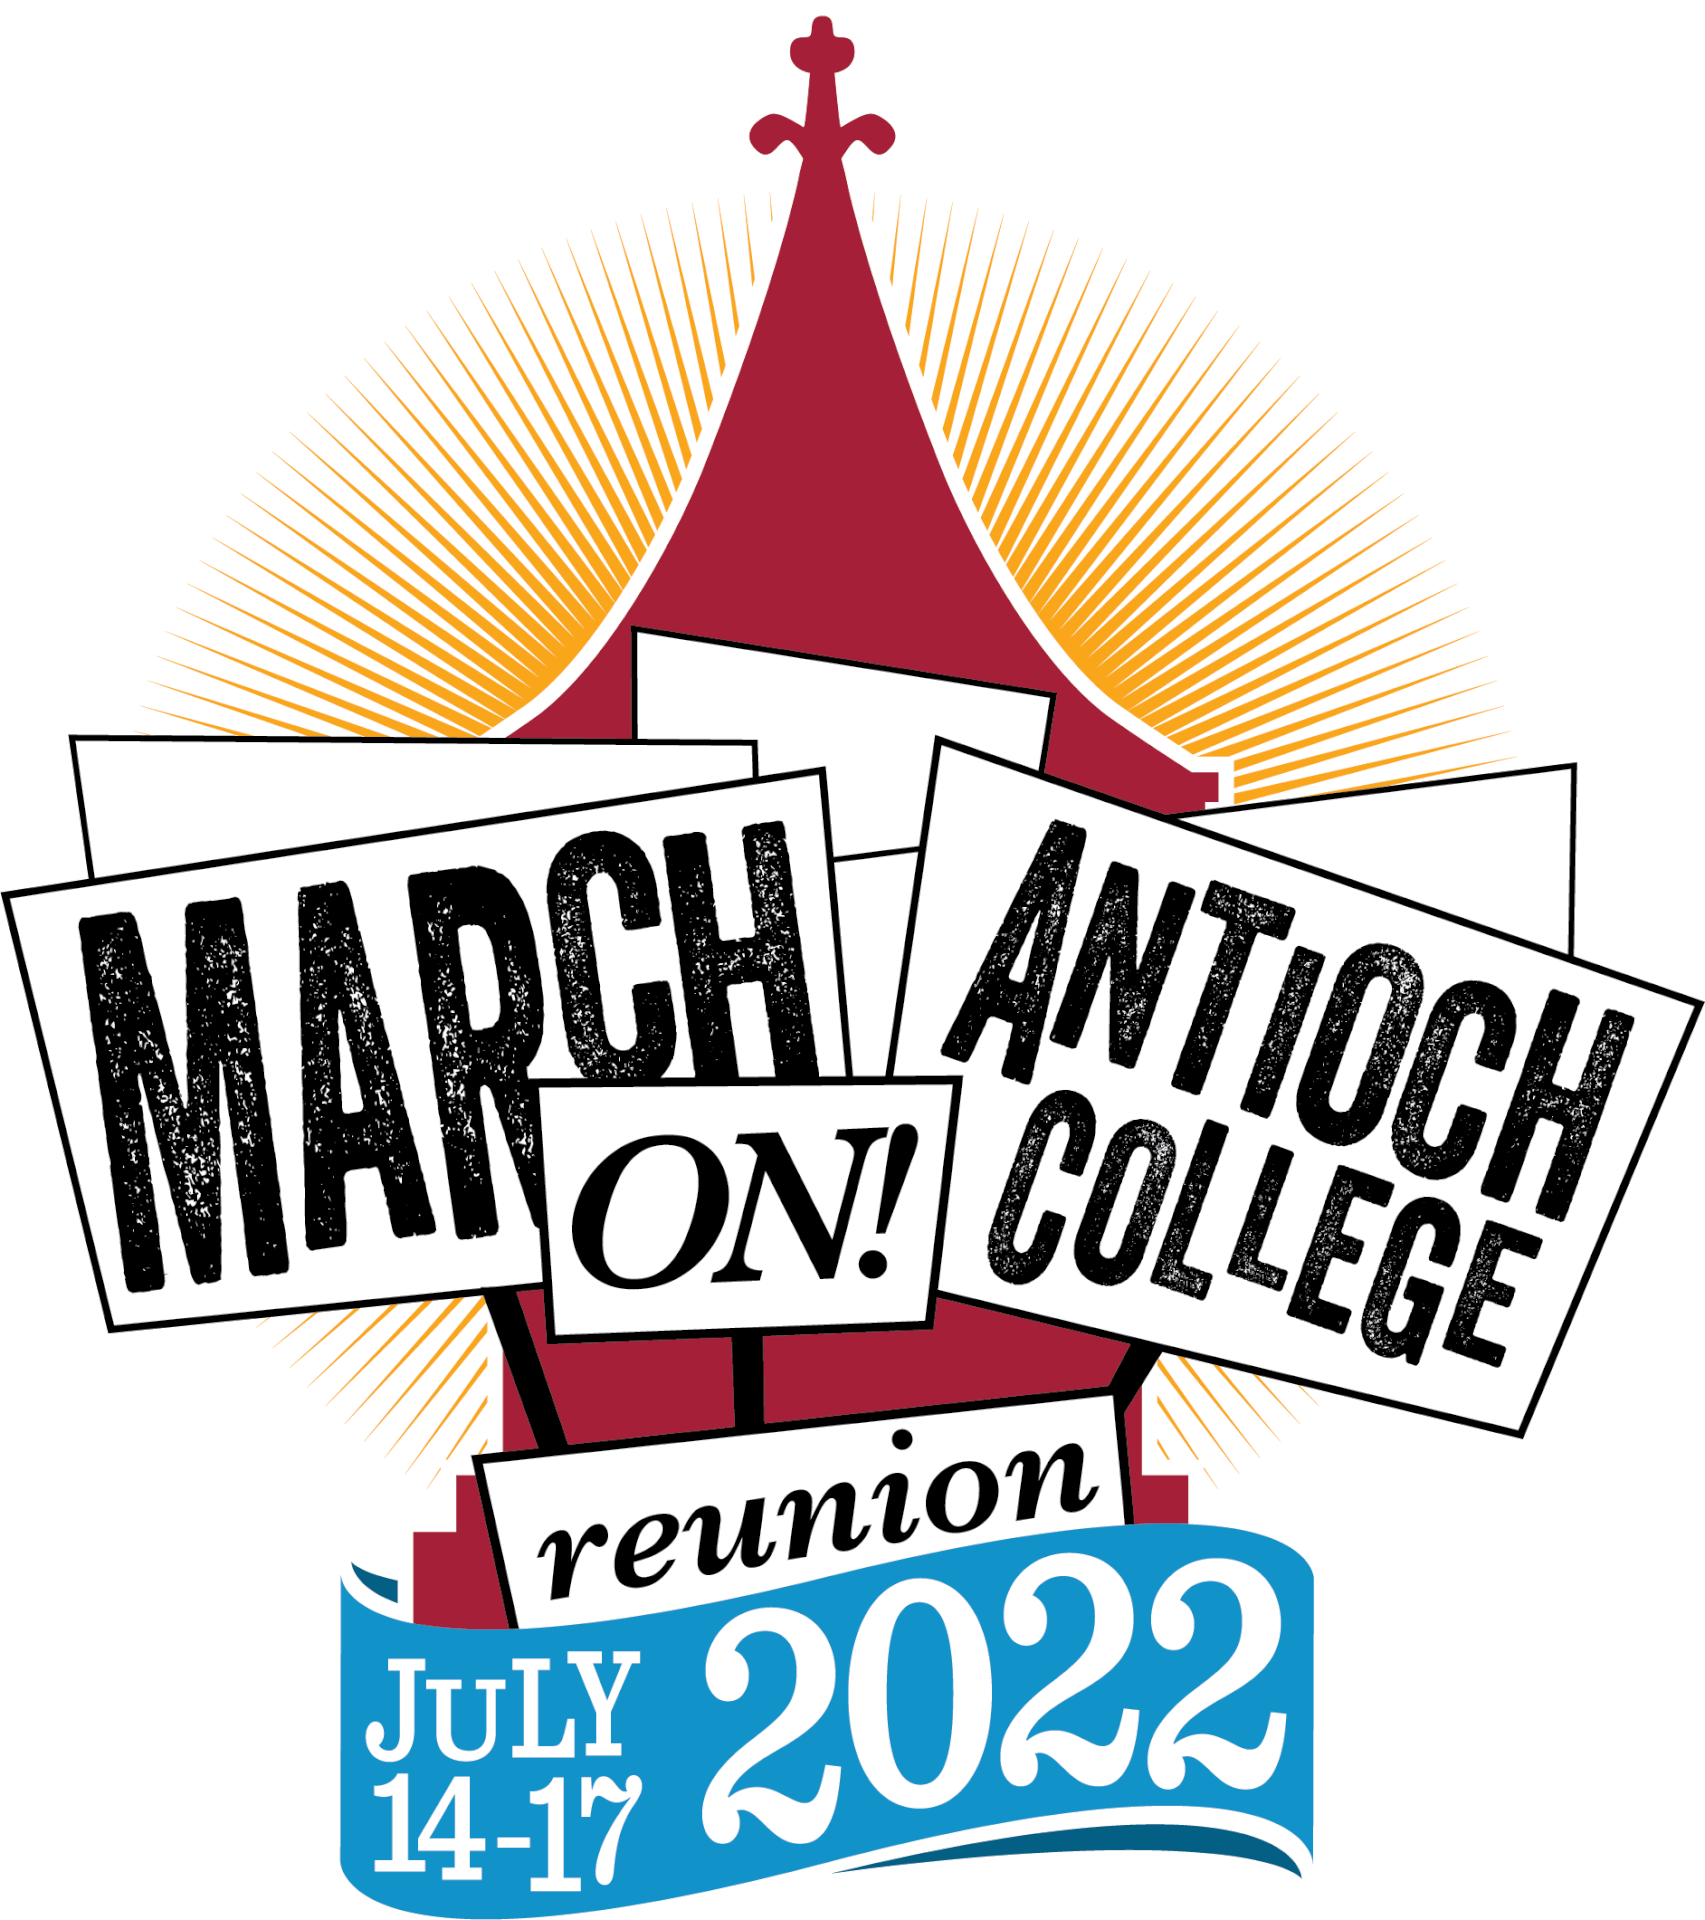 MARCH On! Antioch College Reunion July 14-17, 2022